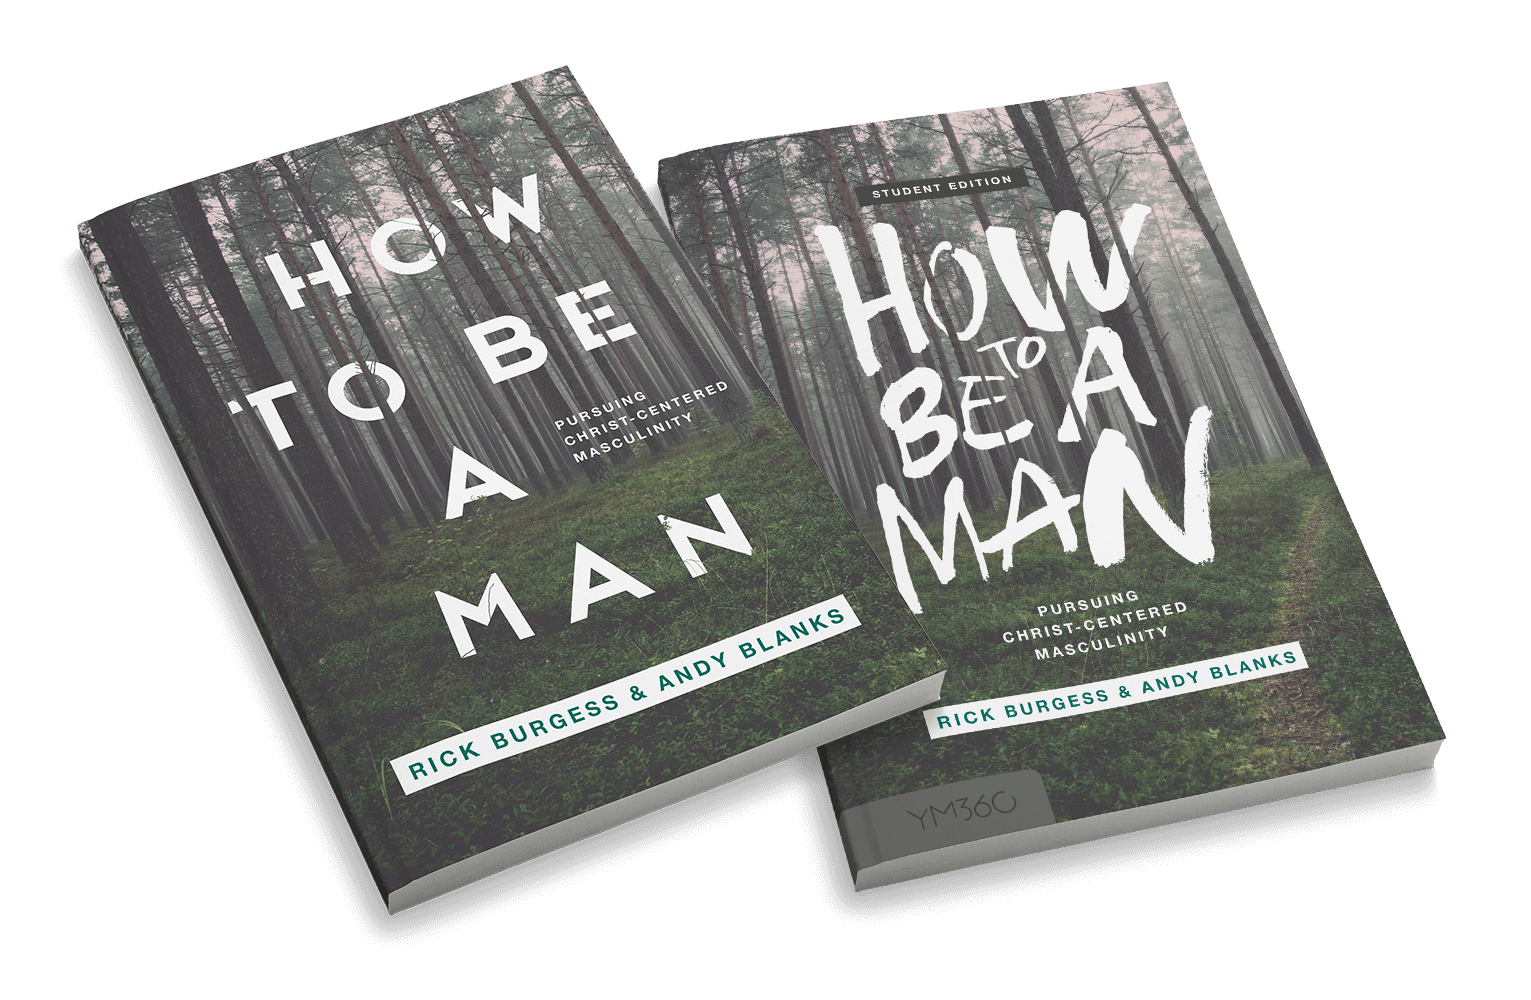 How to Be a Man: Pursuing Christ-Centered Masculinity Small Group Bundle